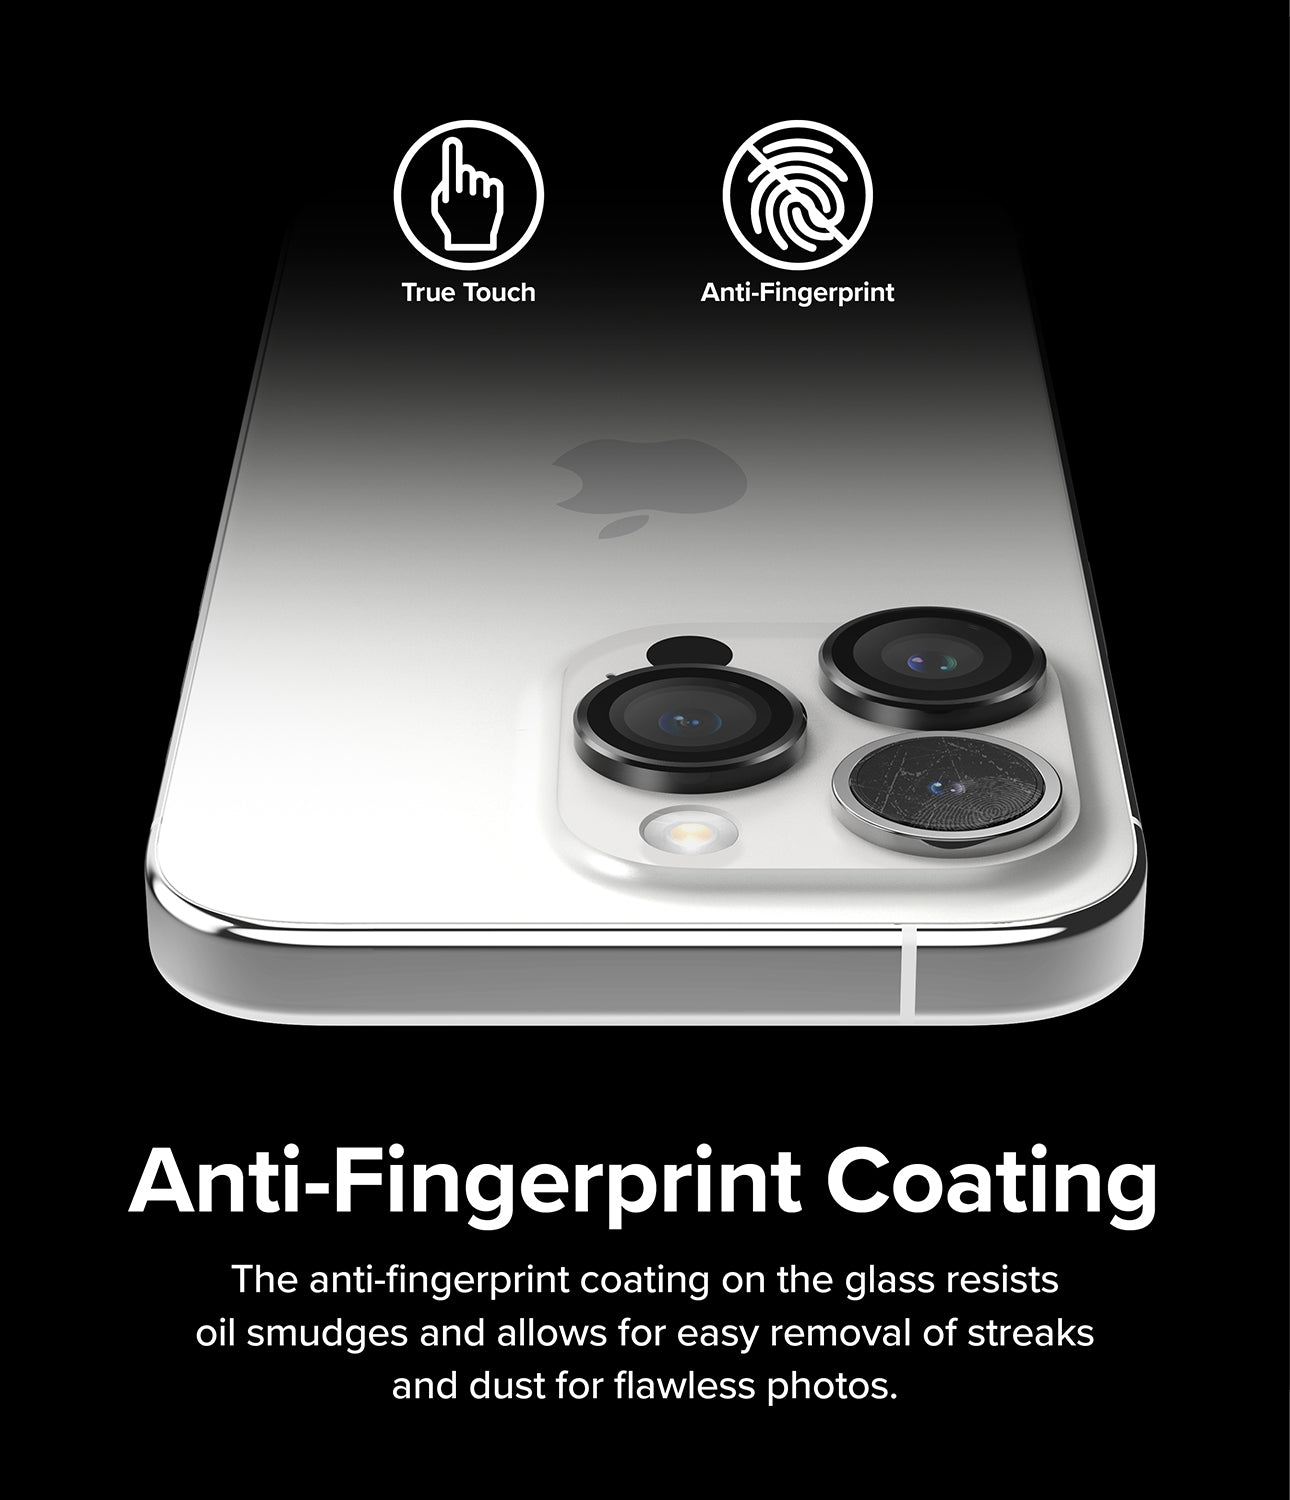 iPhone 15 Pro | Camera Lens Frame Glass - Anti-Fingerprint Coating. The anti-fingerprint coating on the glass resists oil smudges and allows for easy removal of streaks and dust for flawless photos.